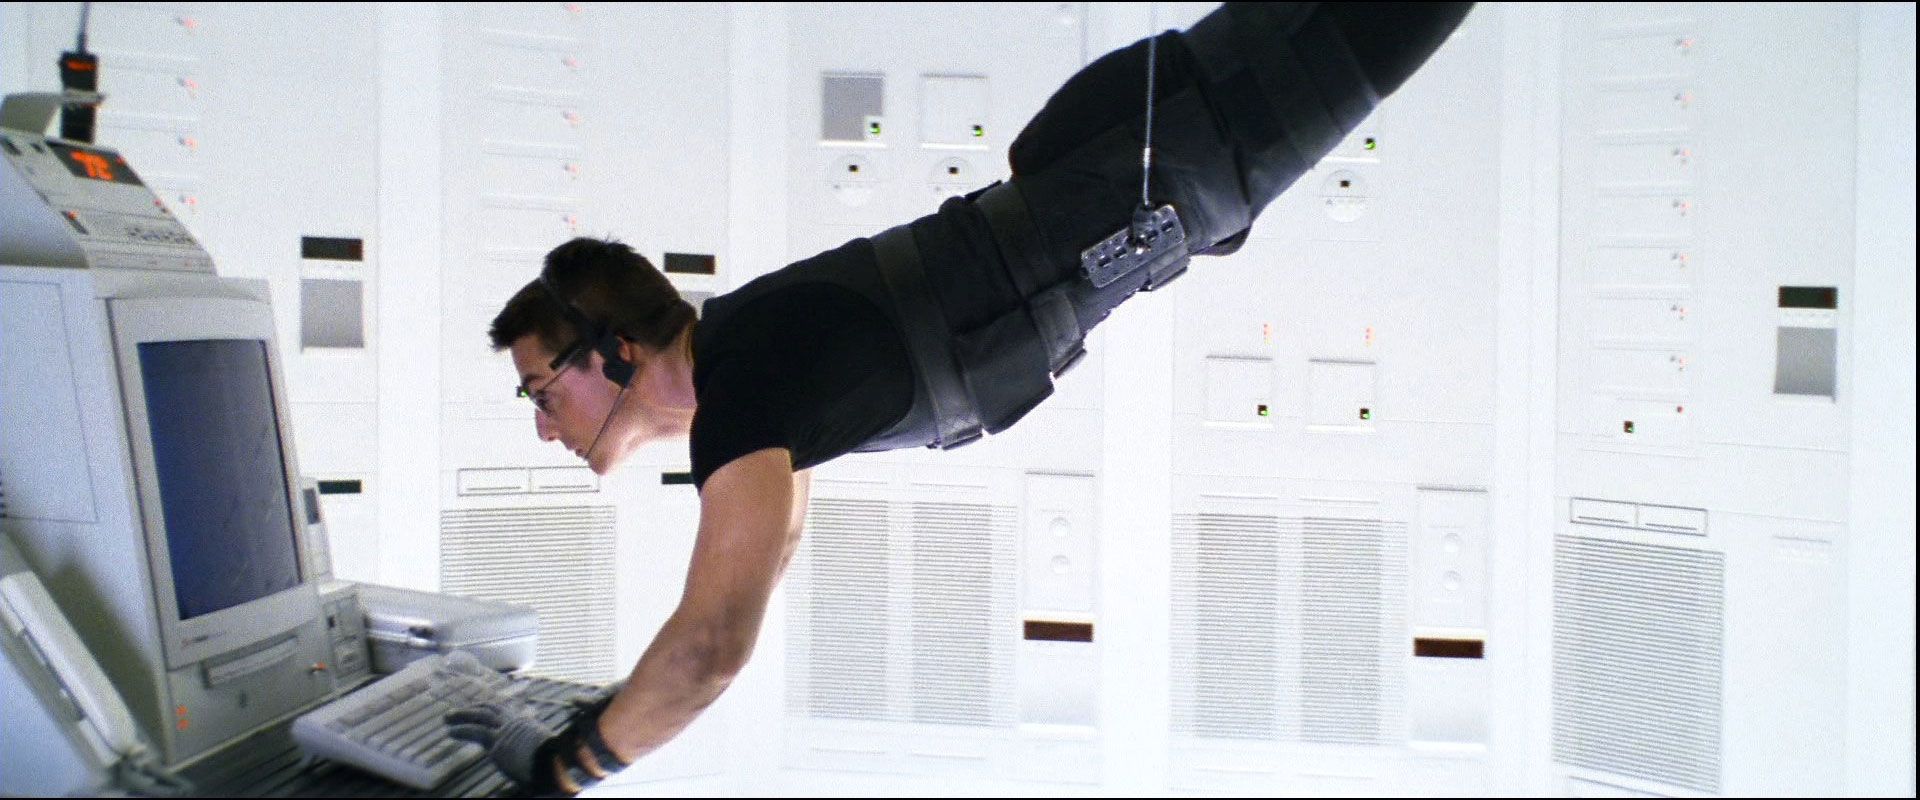 ethan hunt screencaps mission impossible 34541173 1920 800